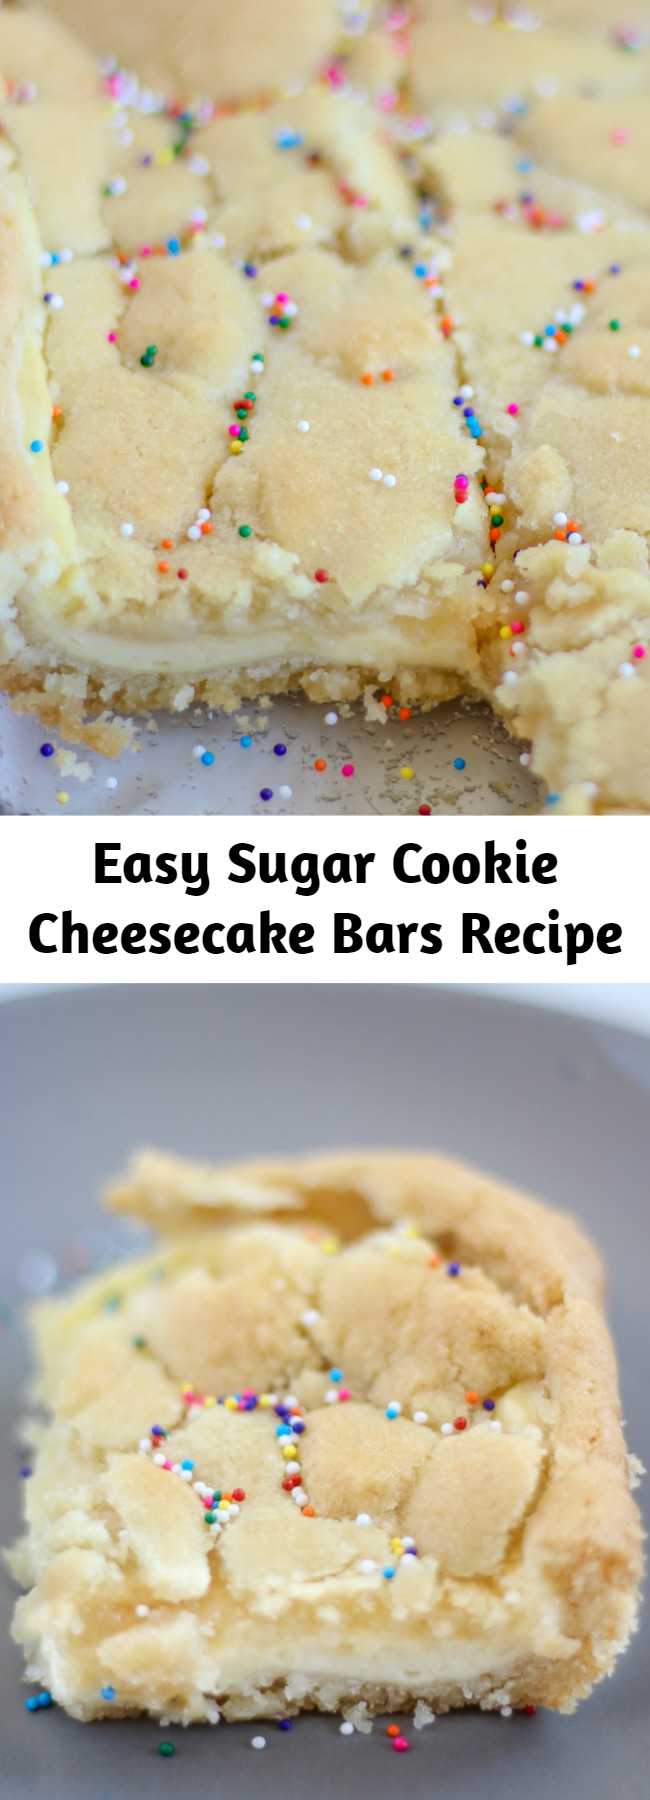 Easy Sugar Cookie Cheesecake Bars Recipe - This is the best dessert ever! If you love sugar cookies and cheesecake, then you will die for this dish! This sugar cookie cheesecake is so easy to make but tastes amazing. It is a yummy recipe to make for friends and family or just to give yourself a sweet treat. A dessert that has the best of both worlds! #sugarcookies #cookies #cheesecake #desserts #recipes